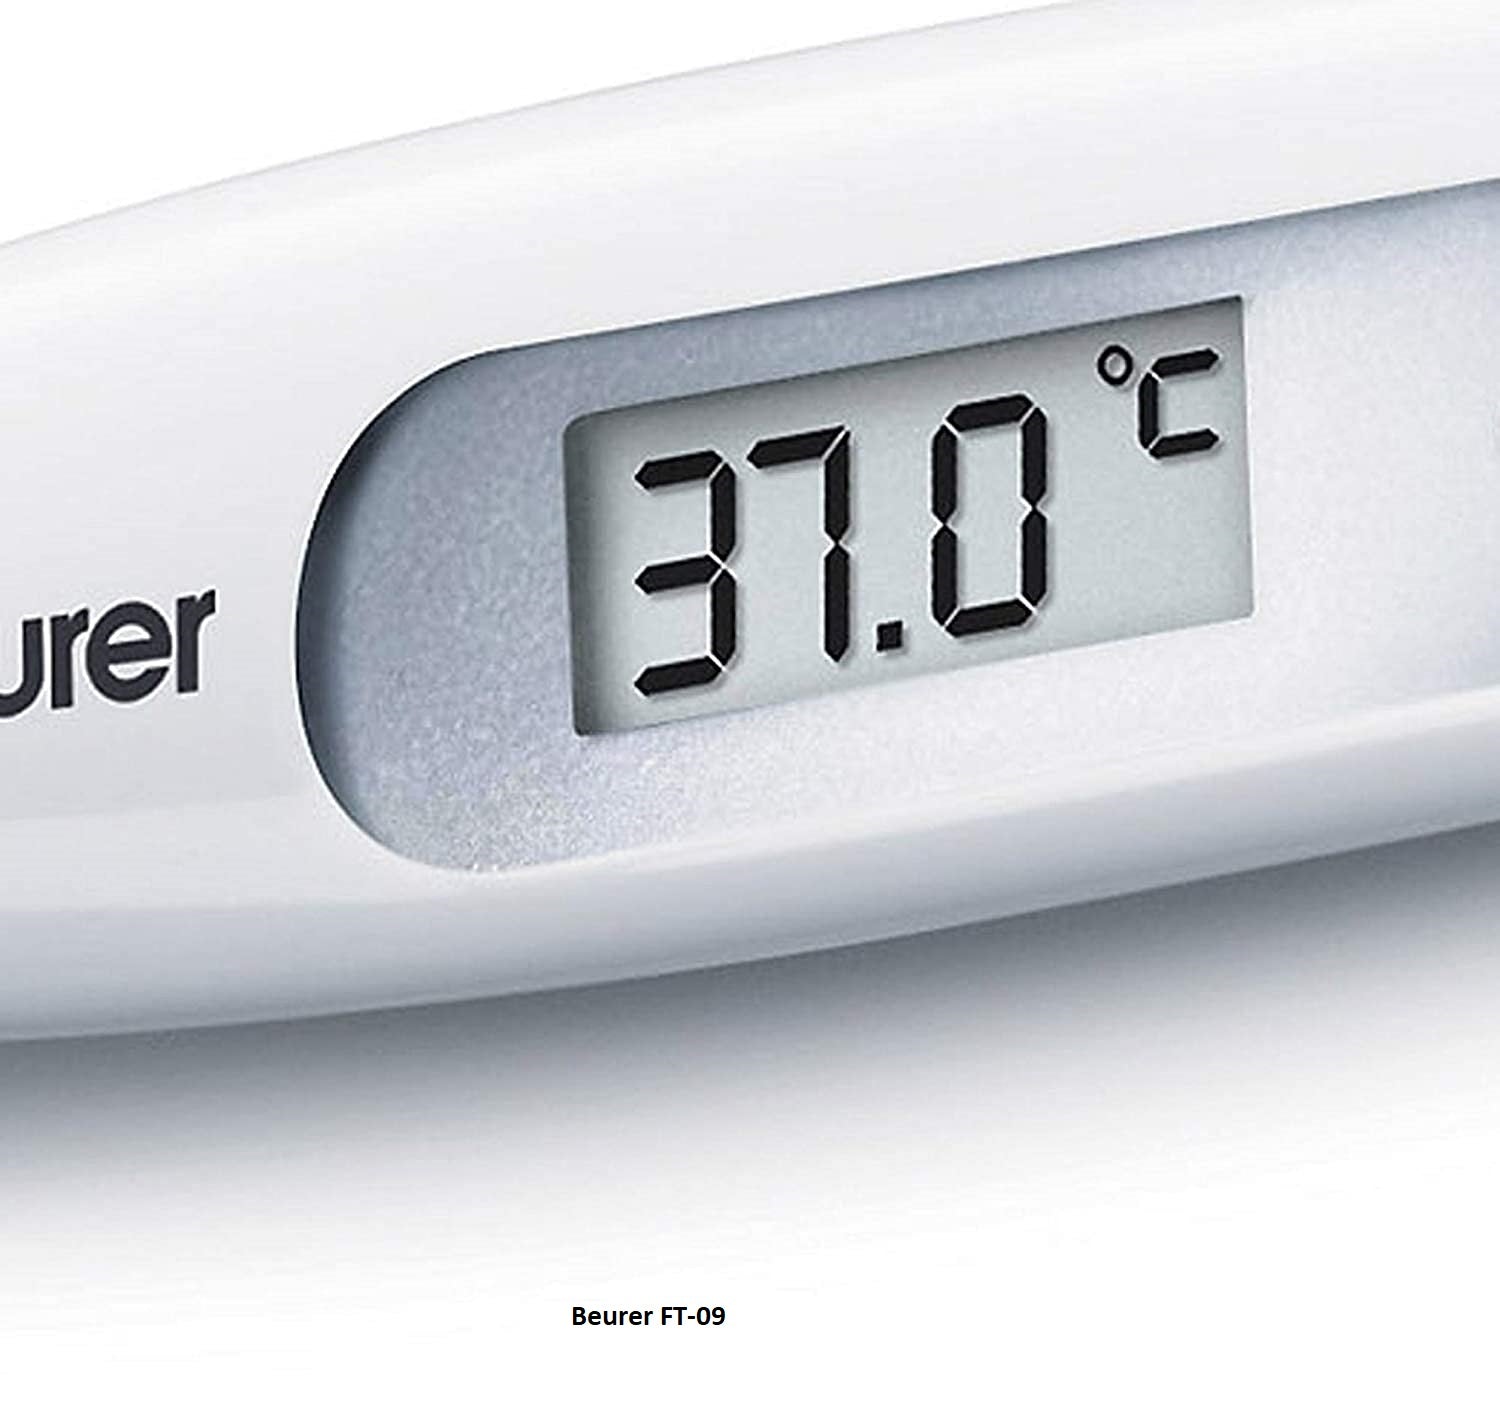 Beurer Clinical Thermometer FT-09